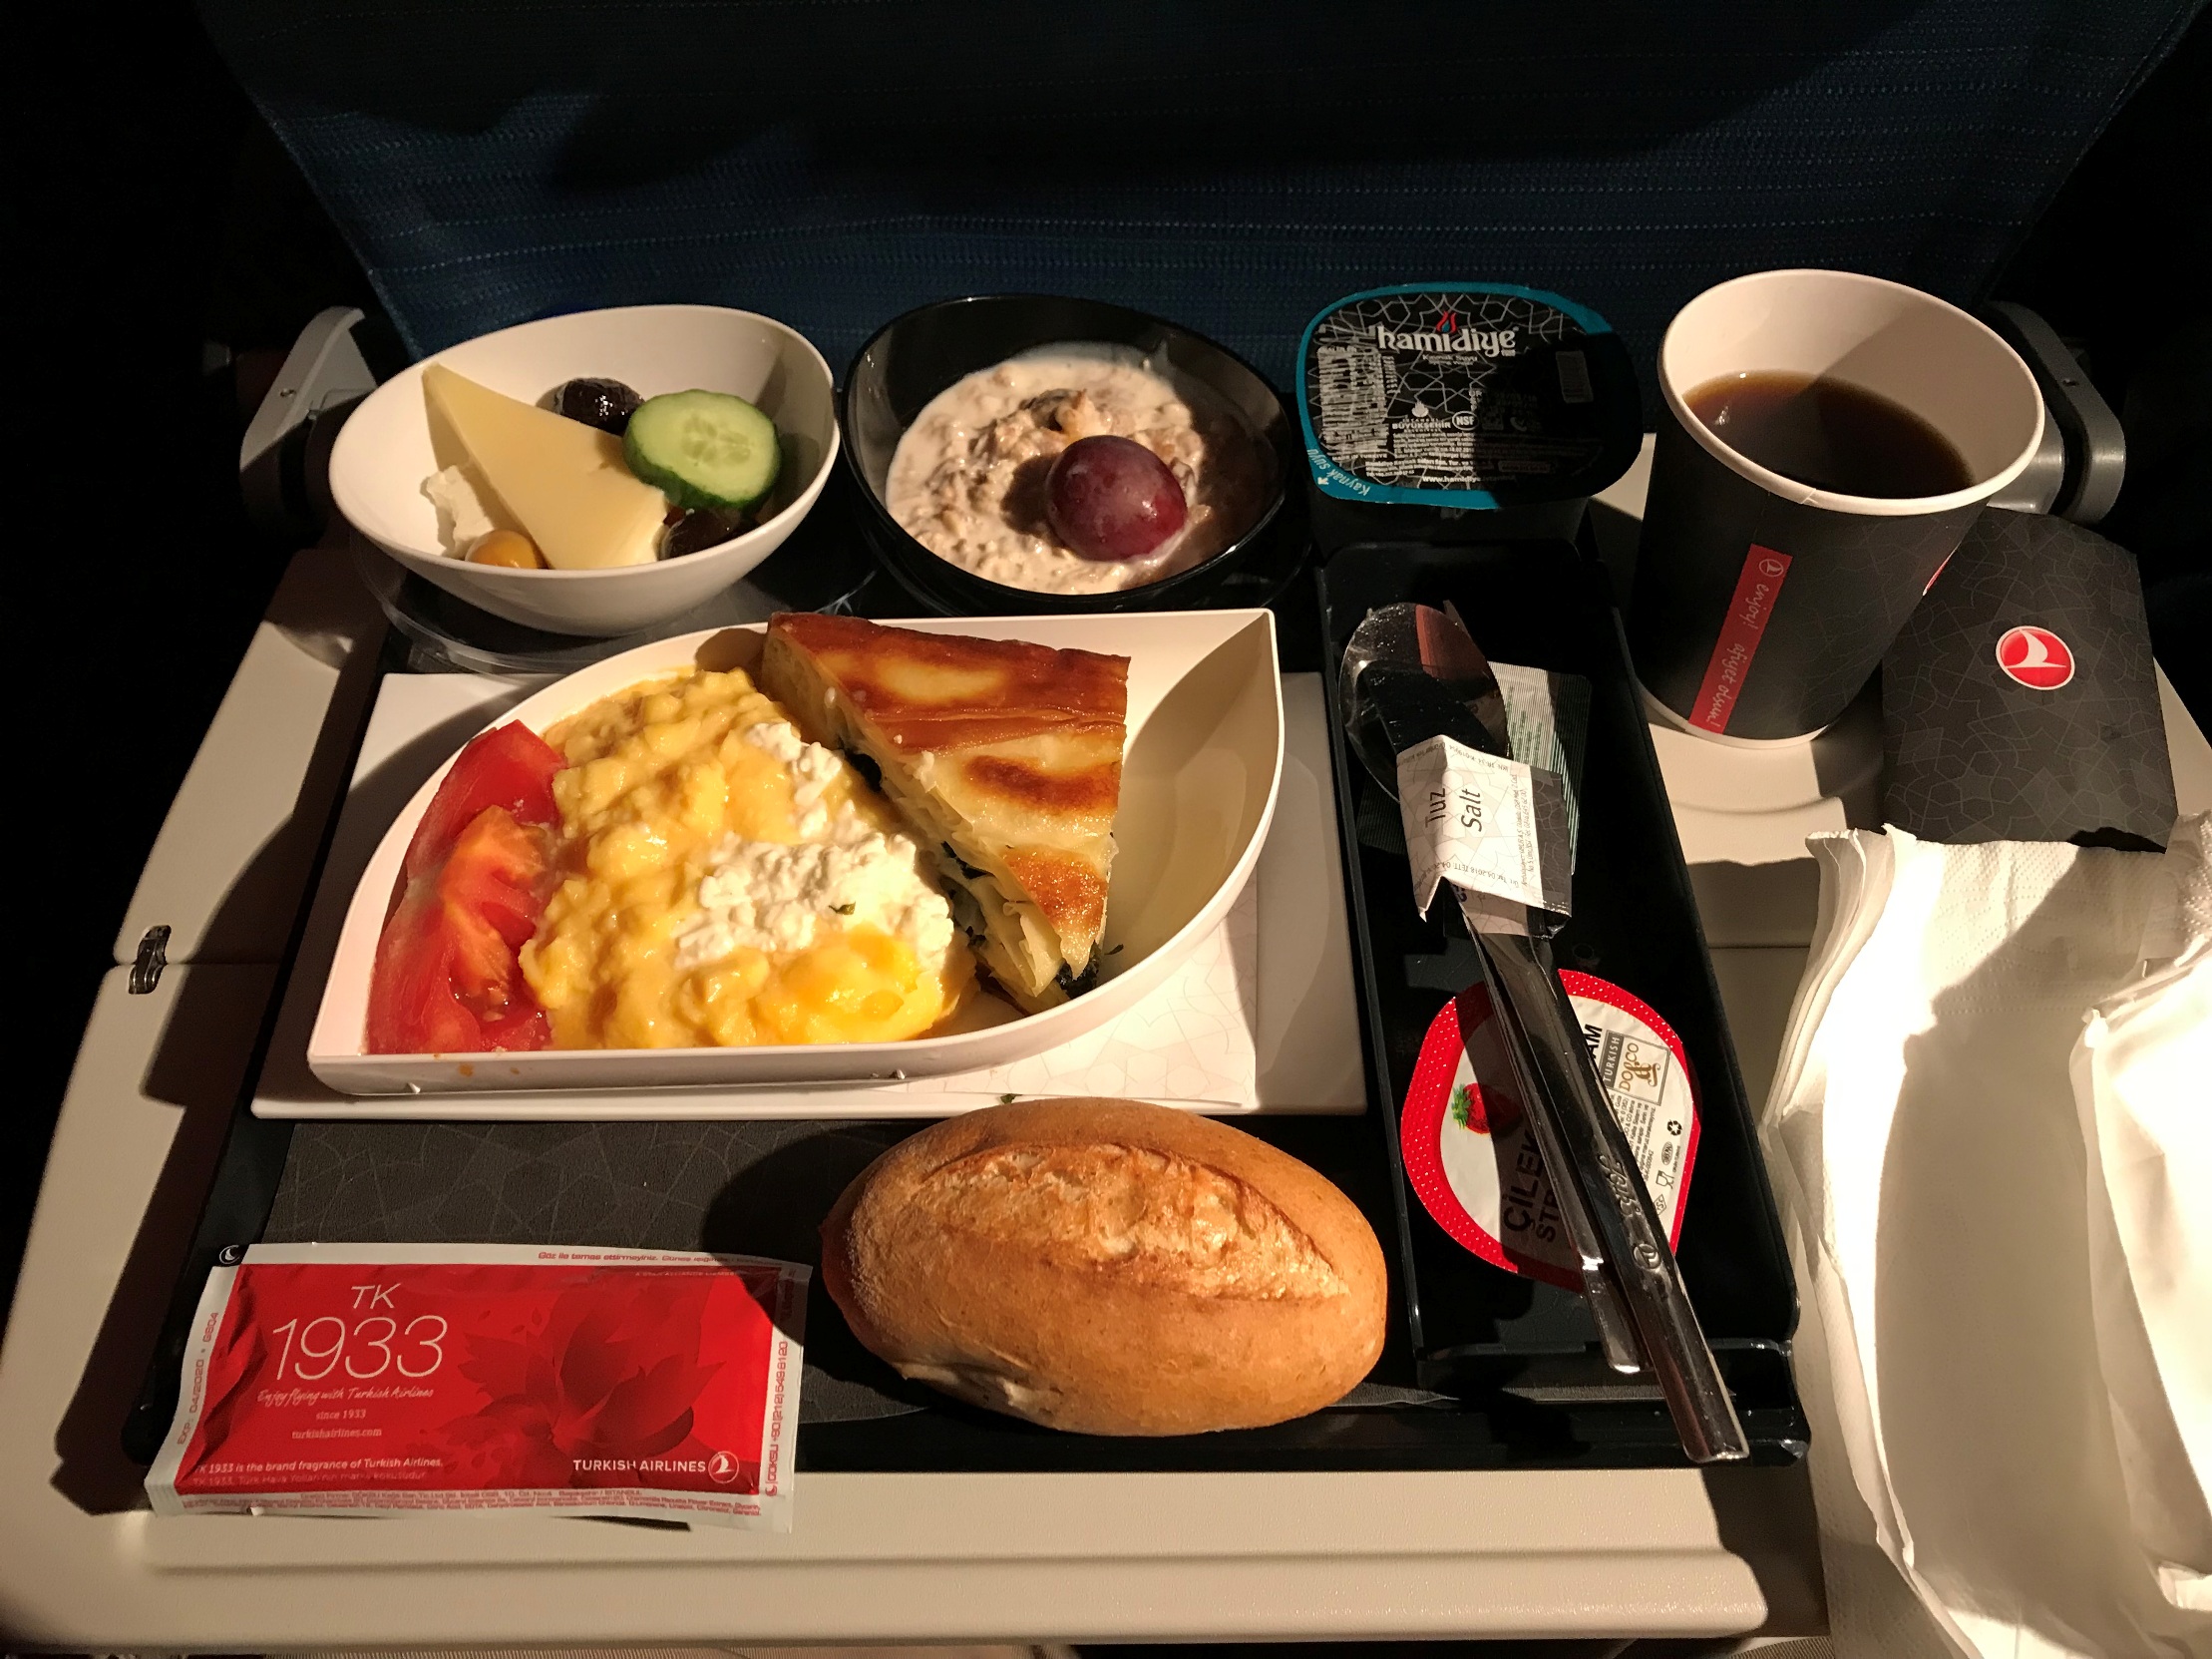 Turkish Airlines Inflight Meal (Istanbul-Hong Kong)